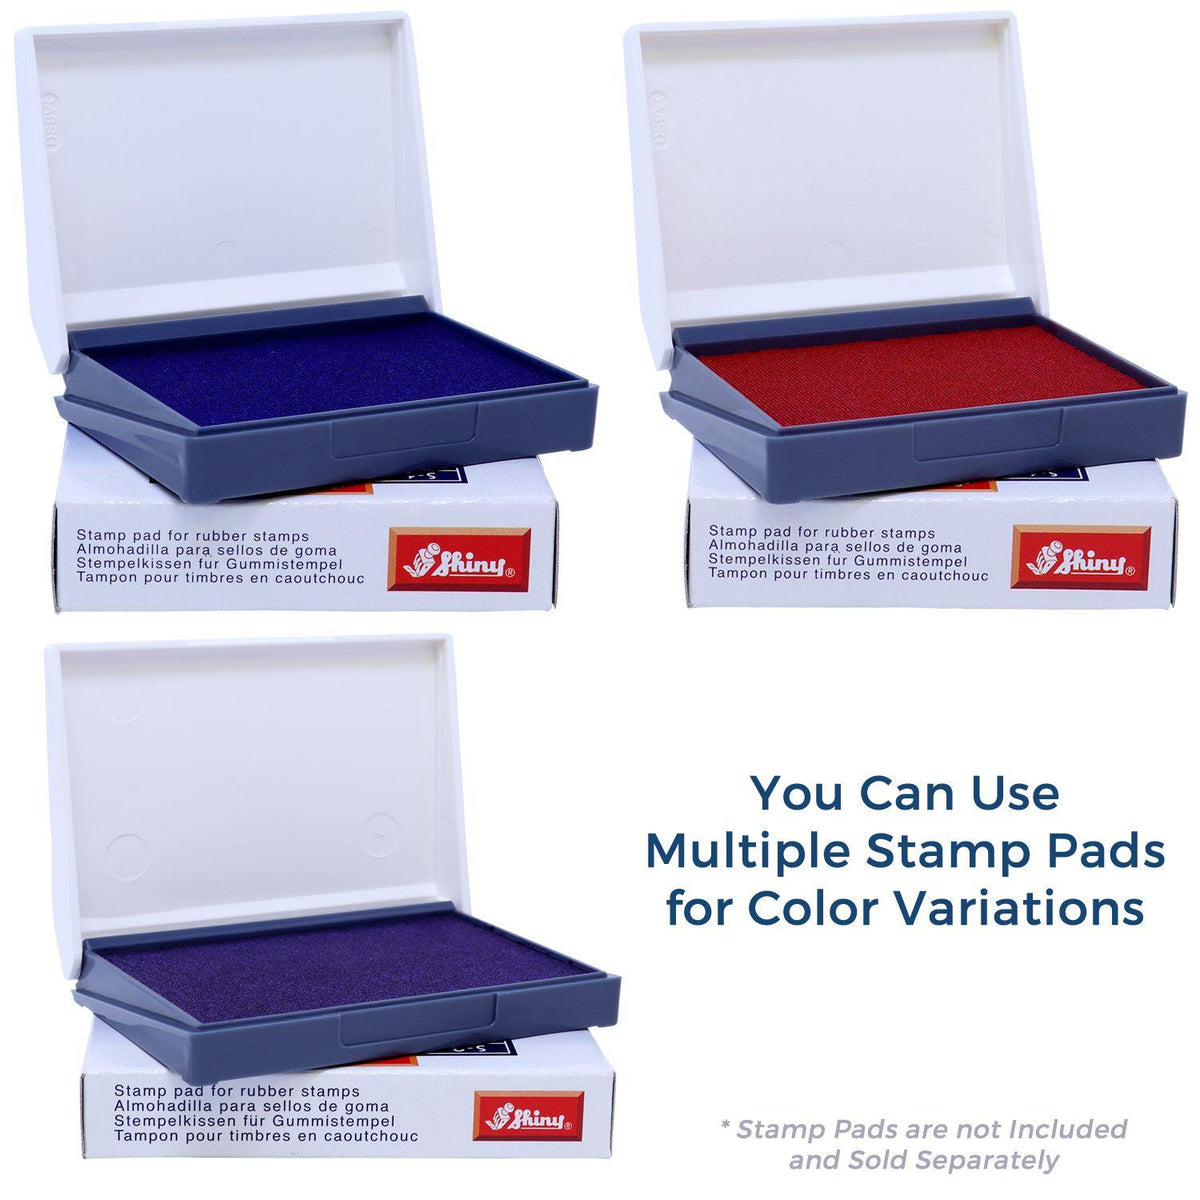 Stamp Pads for Large Postage Due Rubber Stamp Available